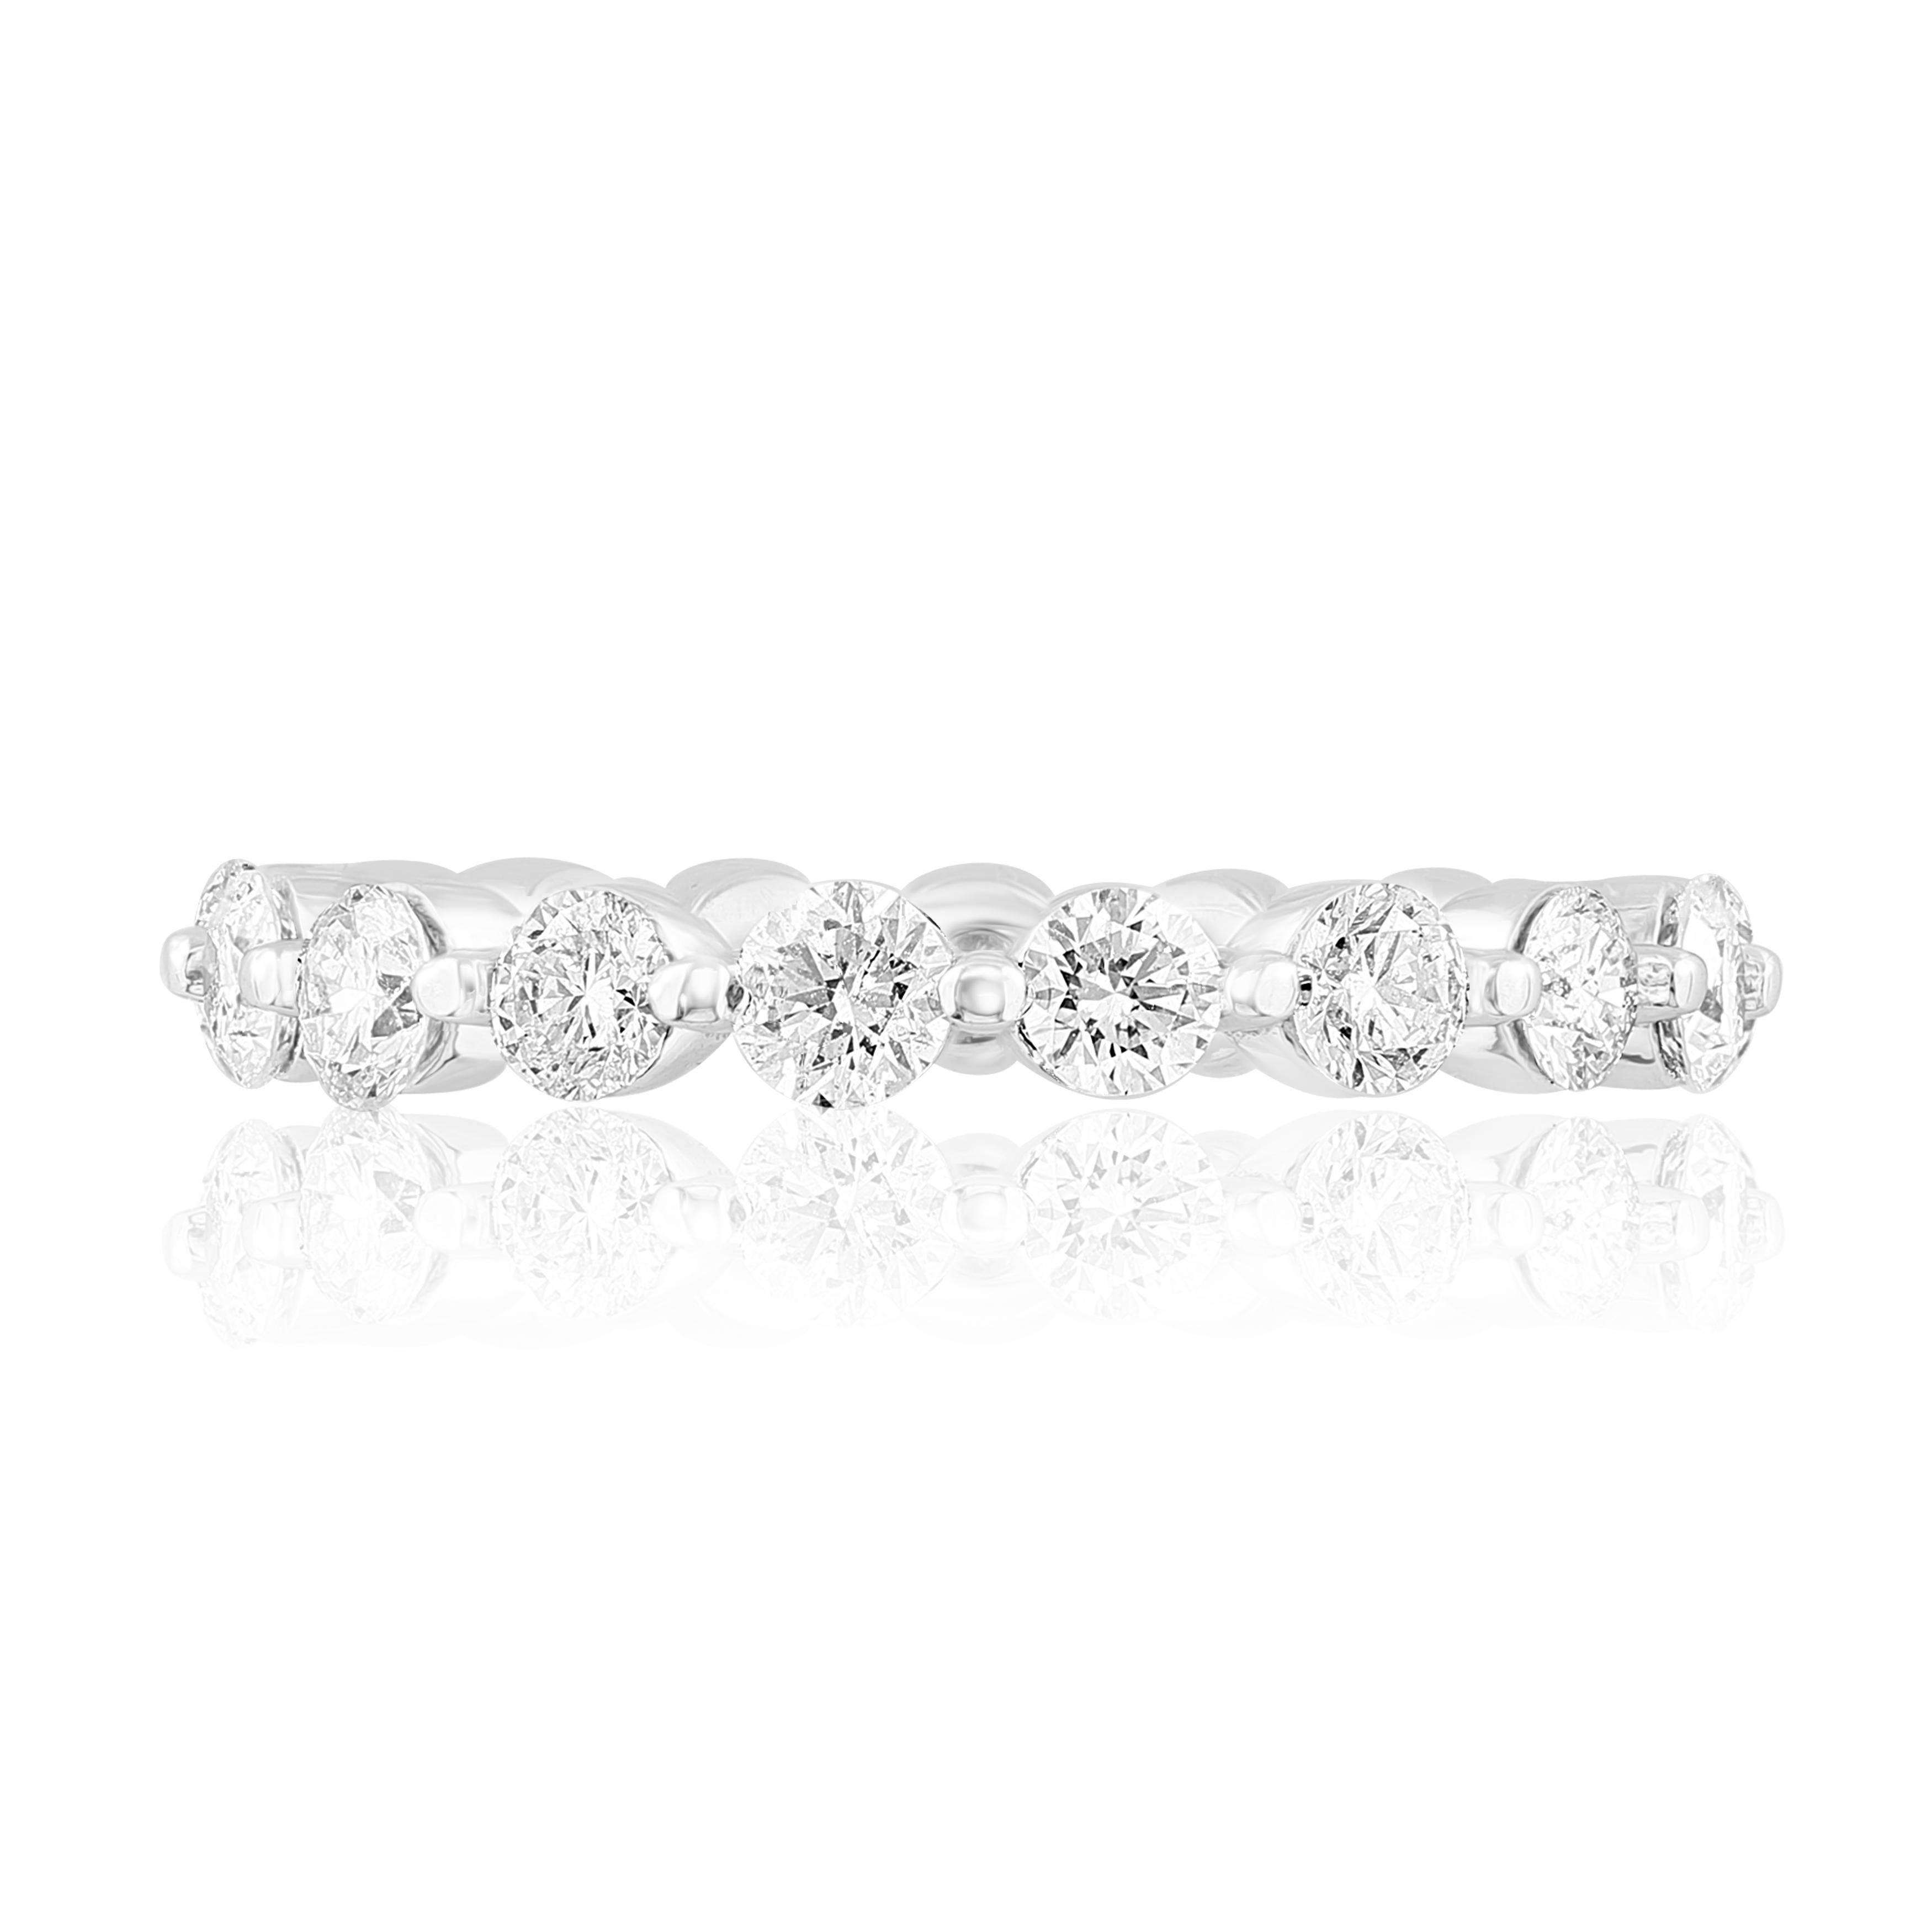 A classic and timeless eternity band style showcasing a row of round brilliant diamonds set in a shared prong 14K white gold mounting. 17 Diamonds weigh 1.75 carats. Size 6.5 US.

Style is available in different price ranges. Prices are based on